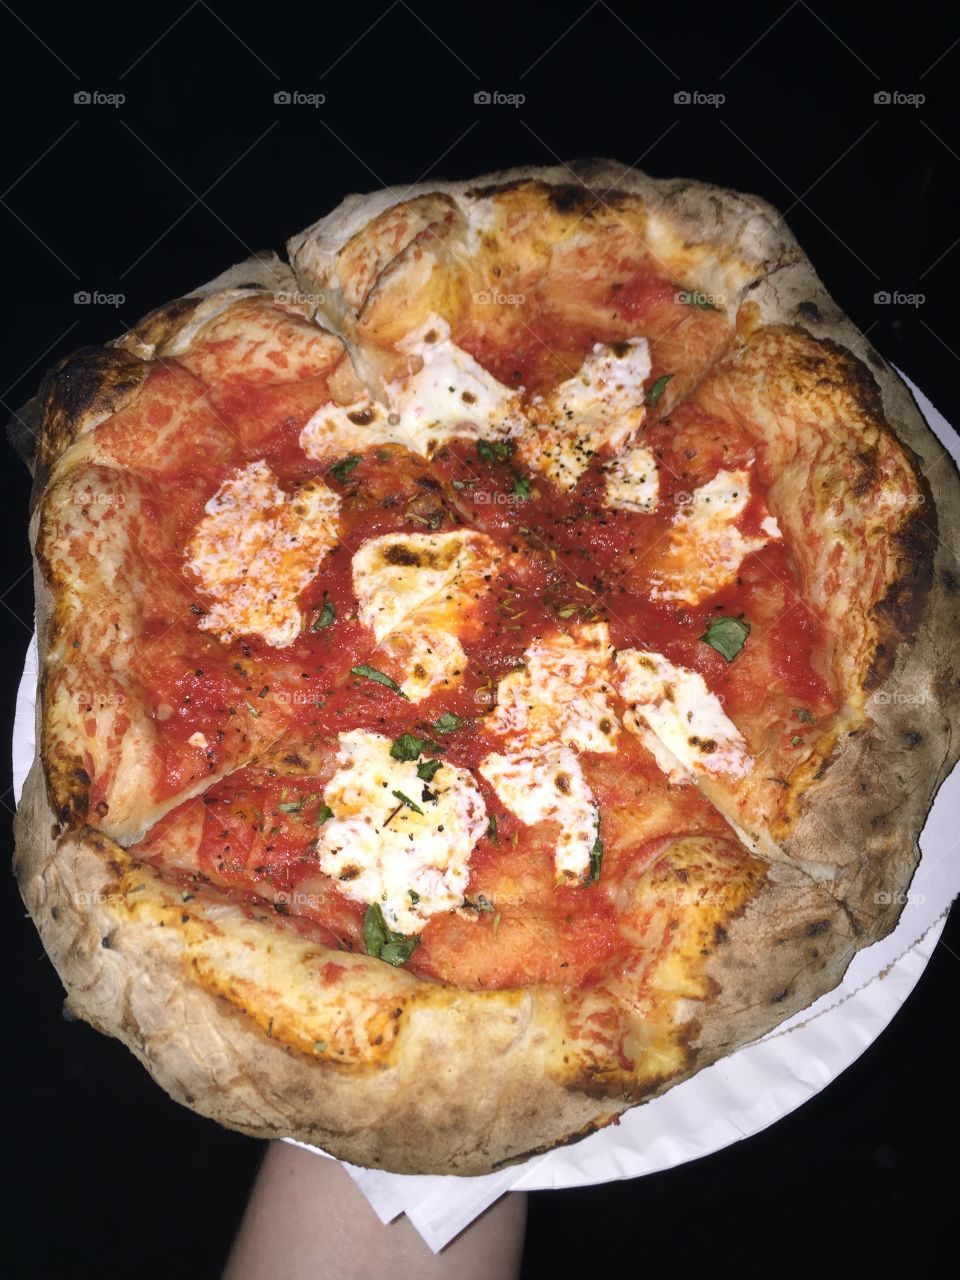 Delicious Margherita pizza at a food truck festival!